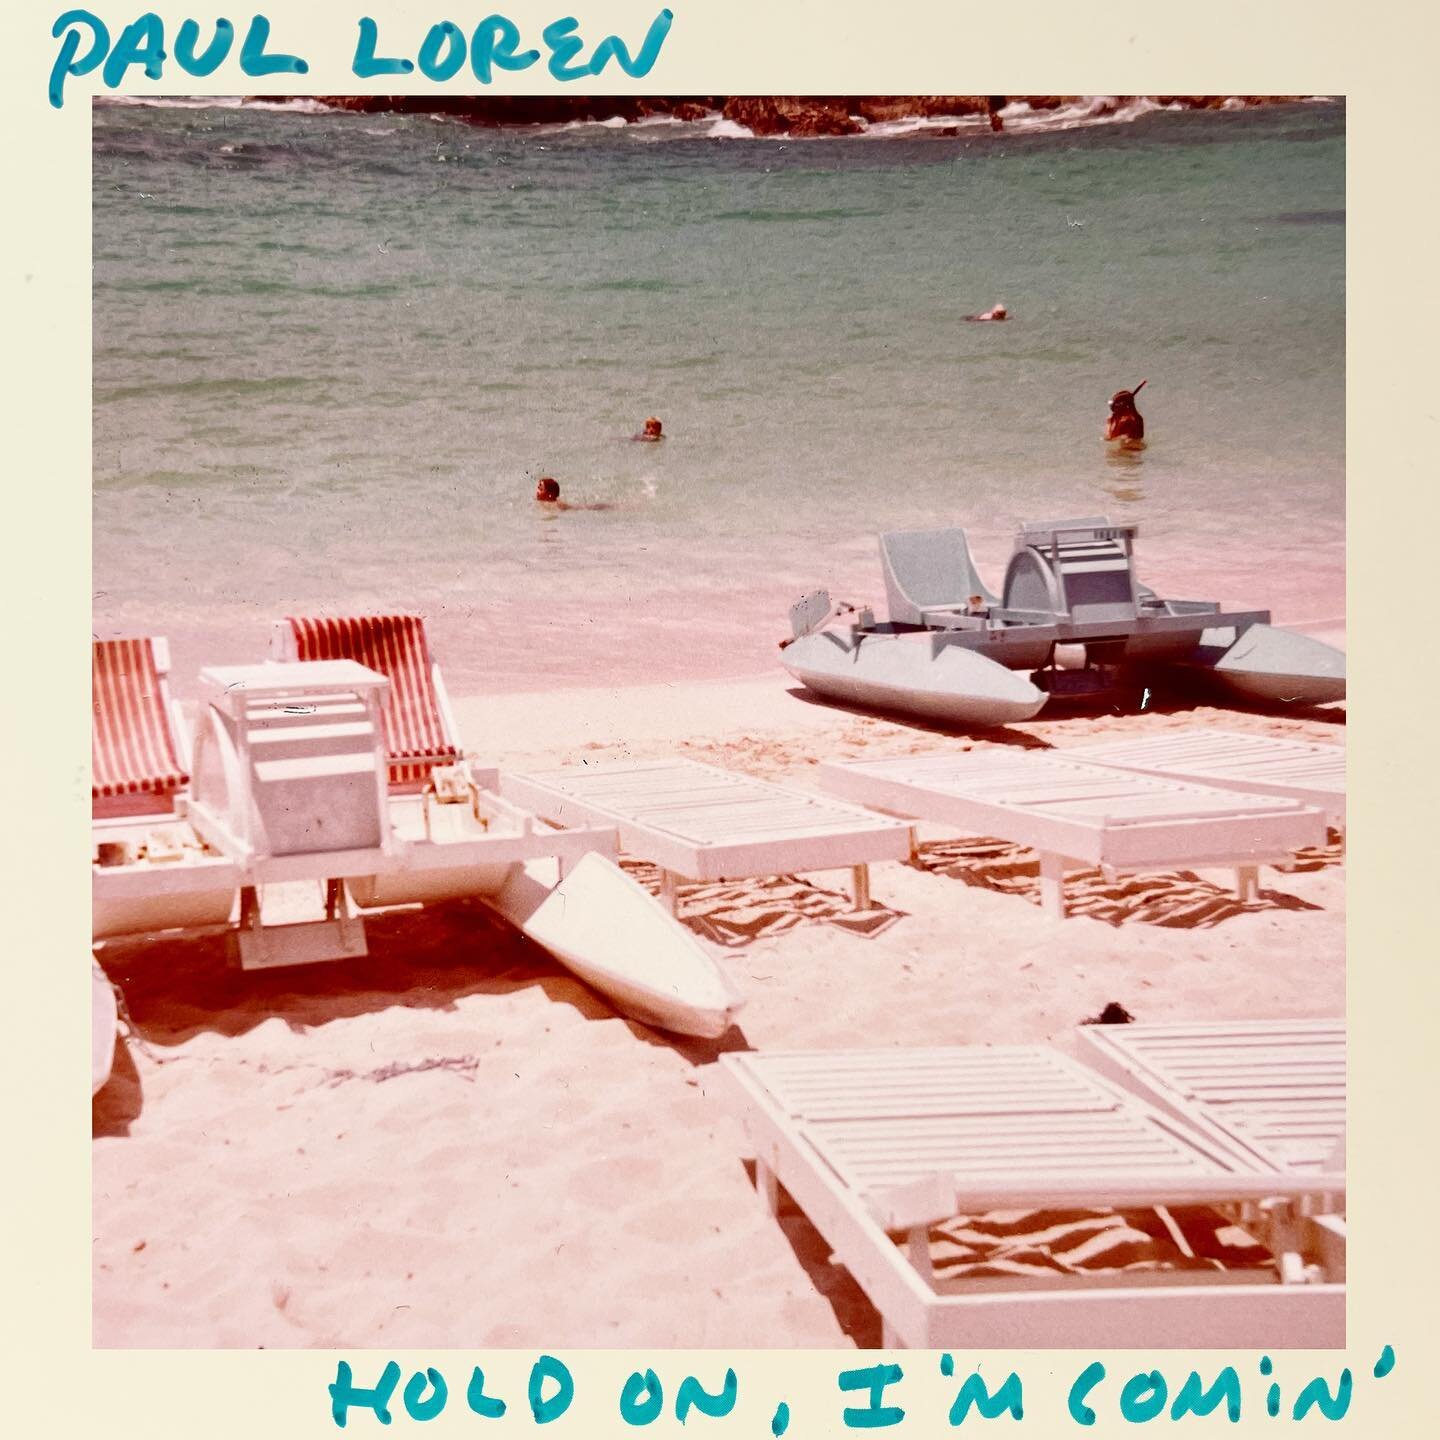 Out now! My version of the classic Sam &amp; Dave jammm &ldquo;Hold On, I&rsquo;m Comin&rsquo;.&rdquo; @albis_music @zachjonesmusic and I recorded MANY a favorite cover song last year, and this is the first of &lsquo;em. Listen wherever you listen! 
